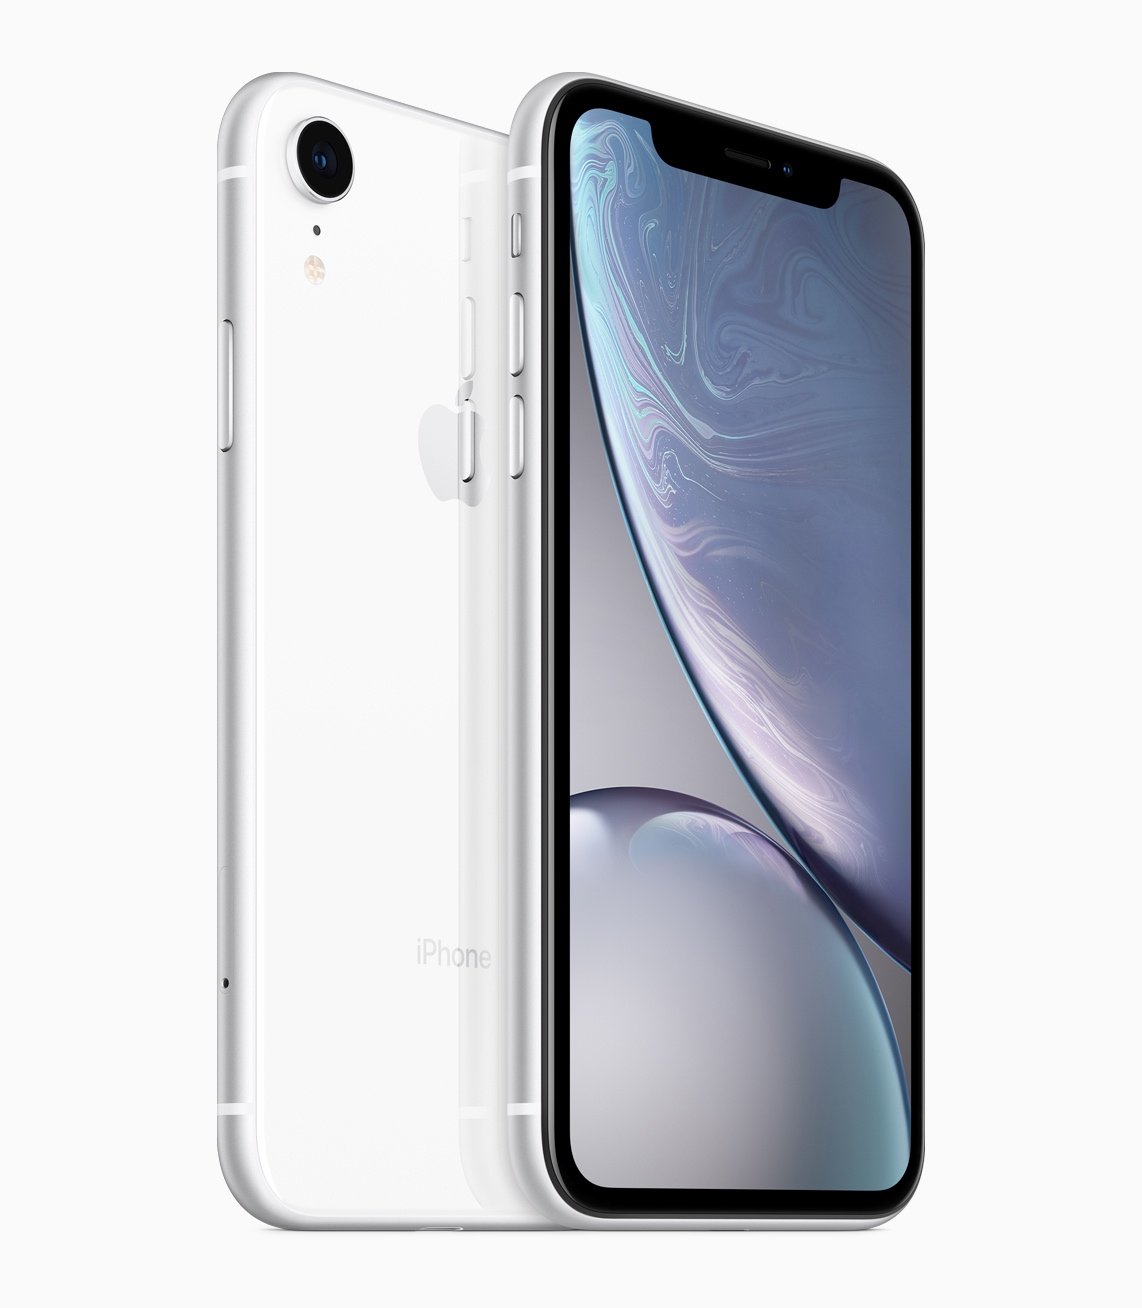 iPhone X Fix for ‘’ This Cable Or Accessory Is Not Certified’’ Error